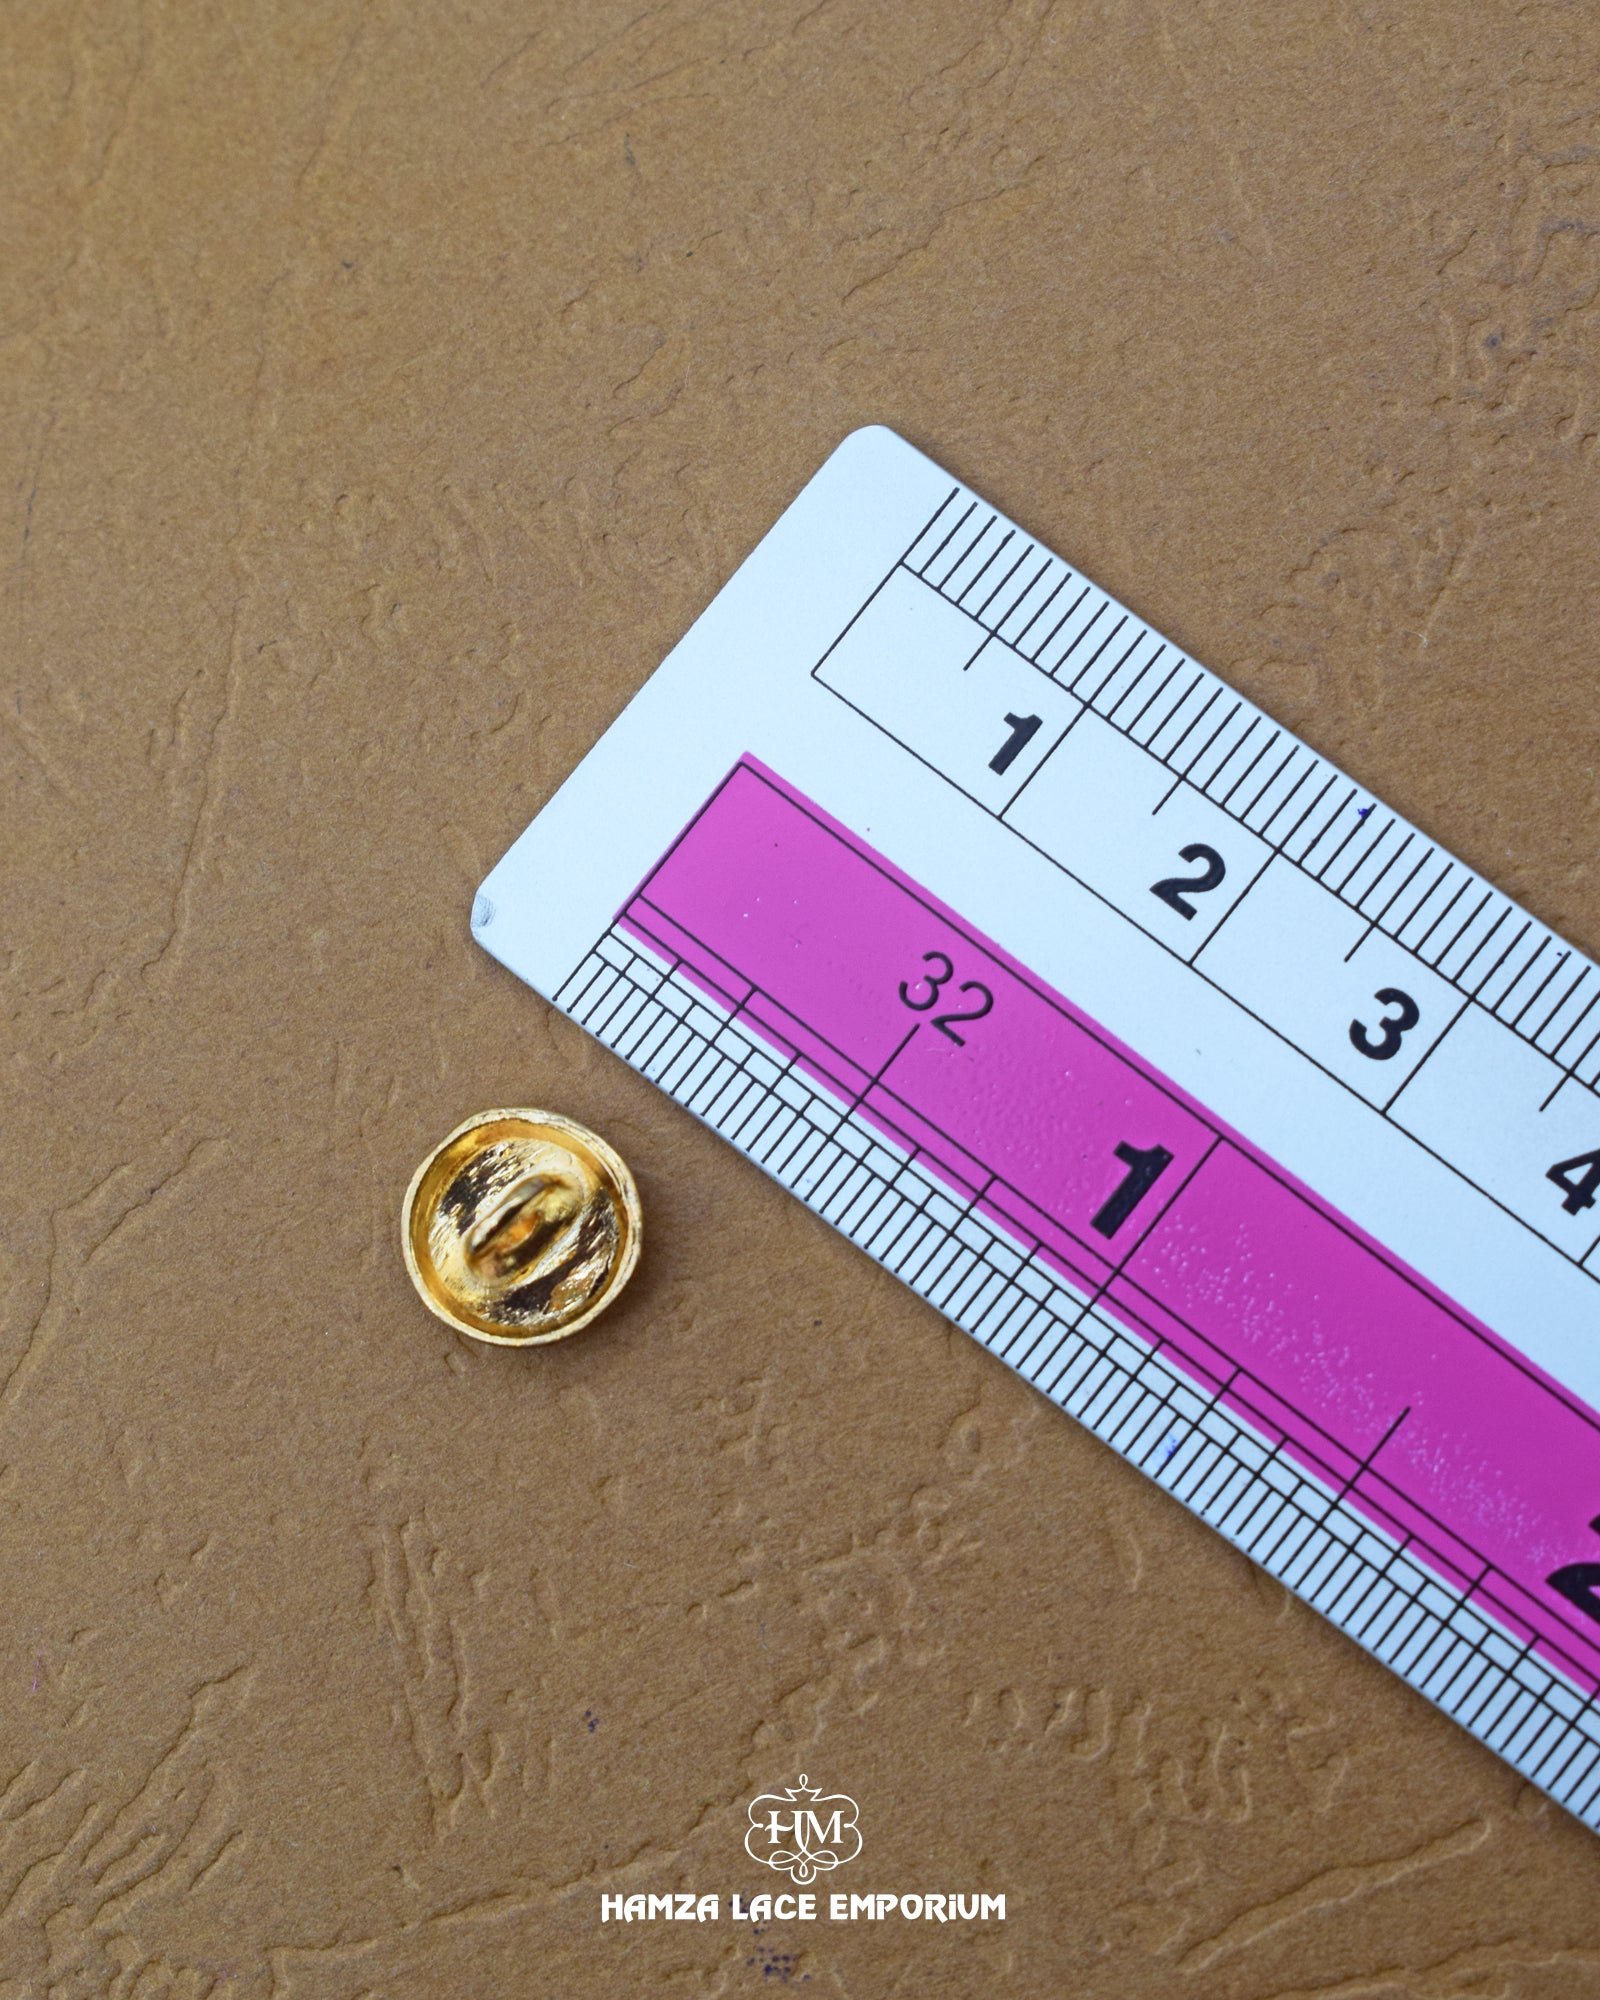 The size of the 'Golden Metal Button MB380' is measured by using a ruler